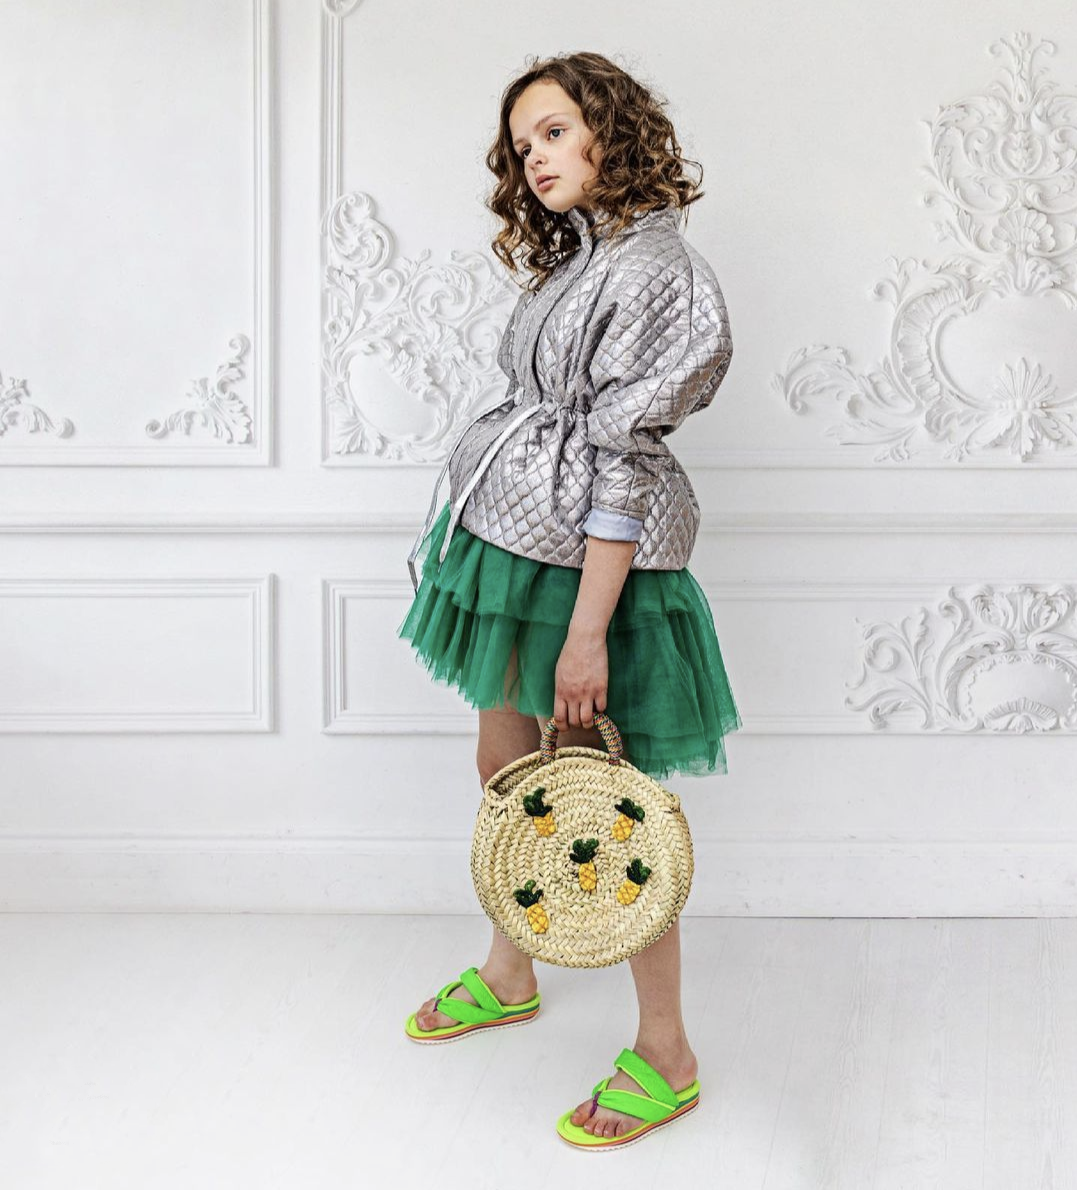 Pepper.Pics poses in her Atari Jacker with a green tiered tulle skirt, and pineapple weaved hand bag